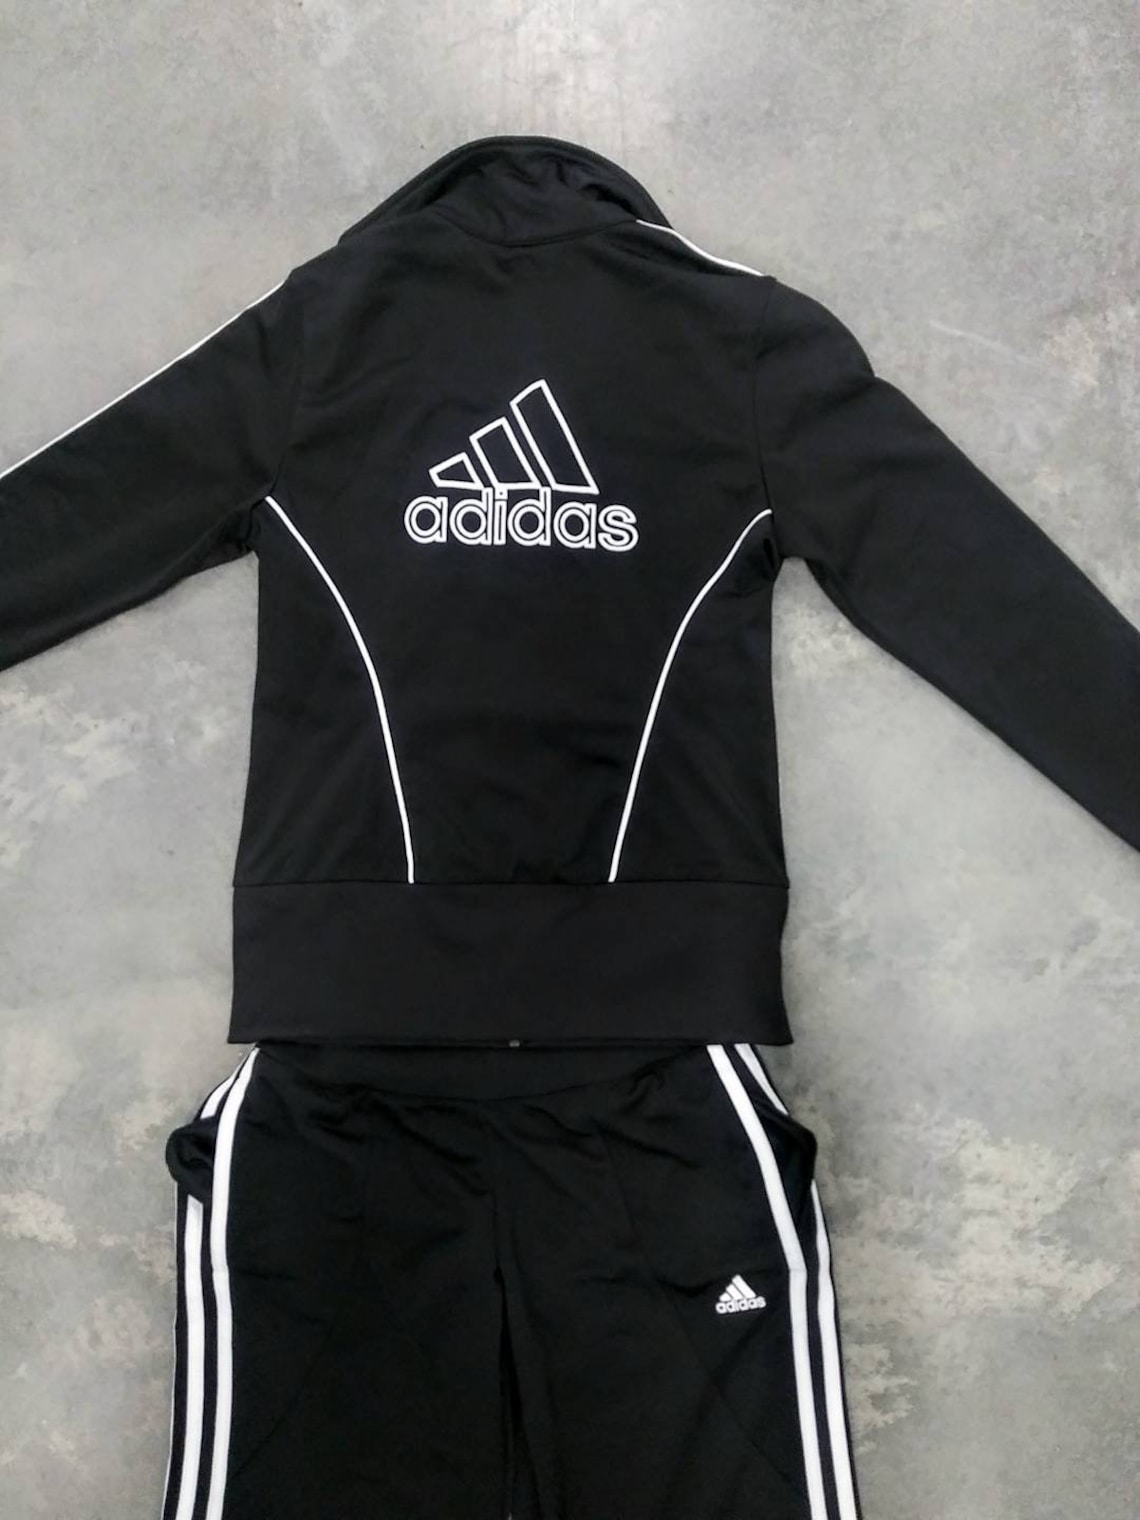 Adidas 1990s Vintage Tracksuit. Black and White Five Pockets | Etsy